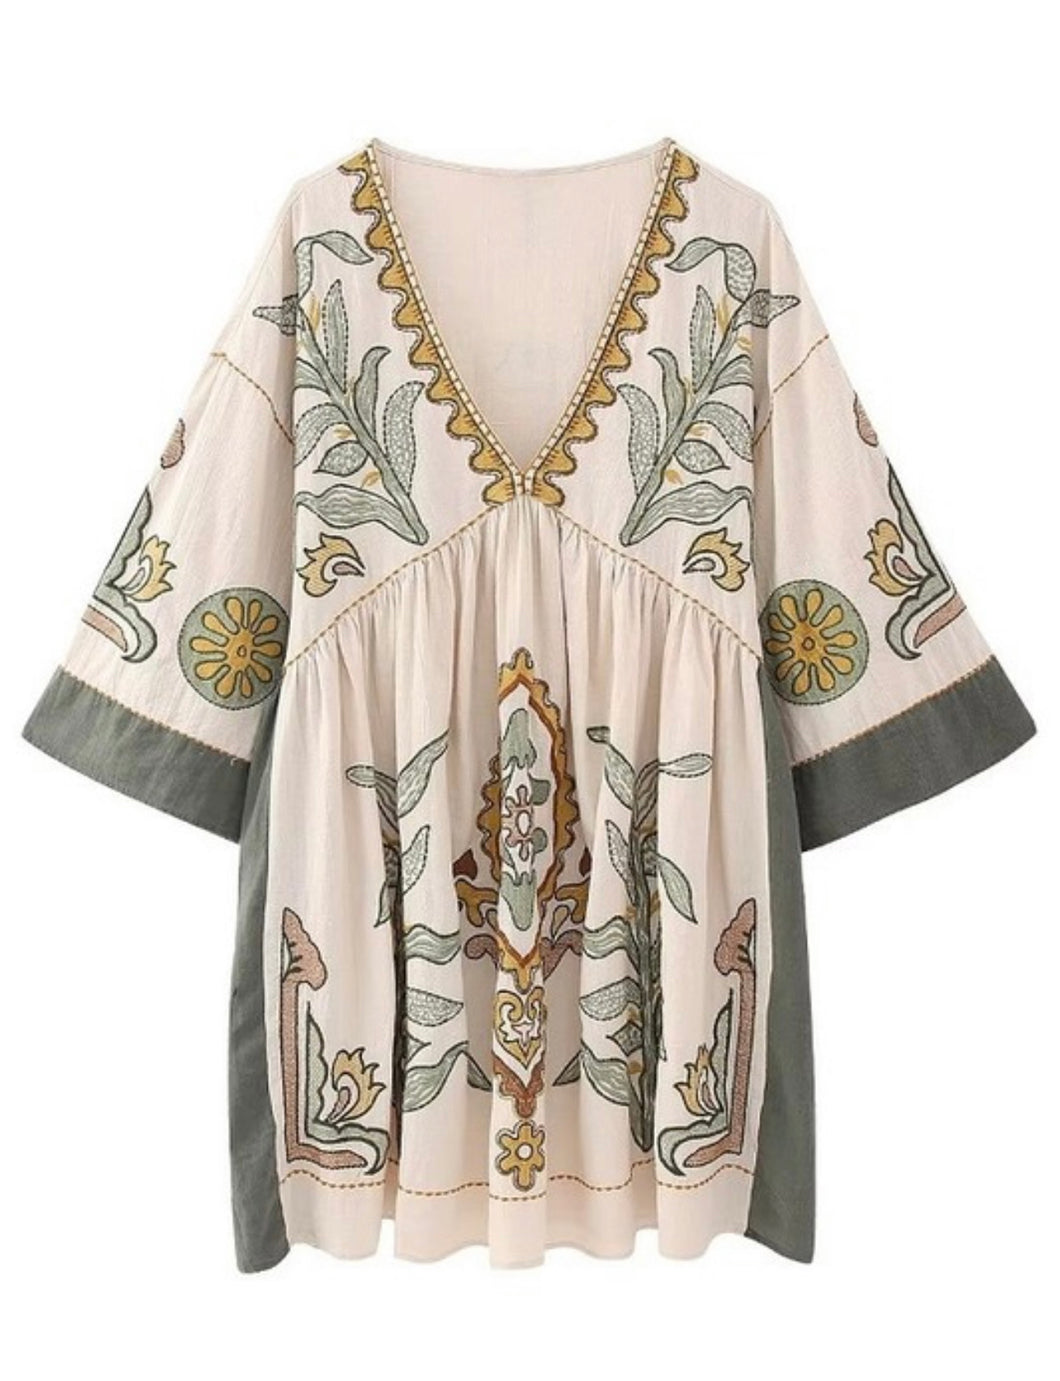 Shannon Embroidered Dress